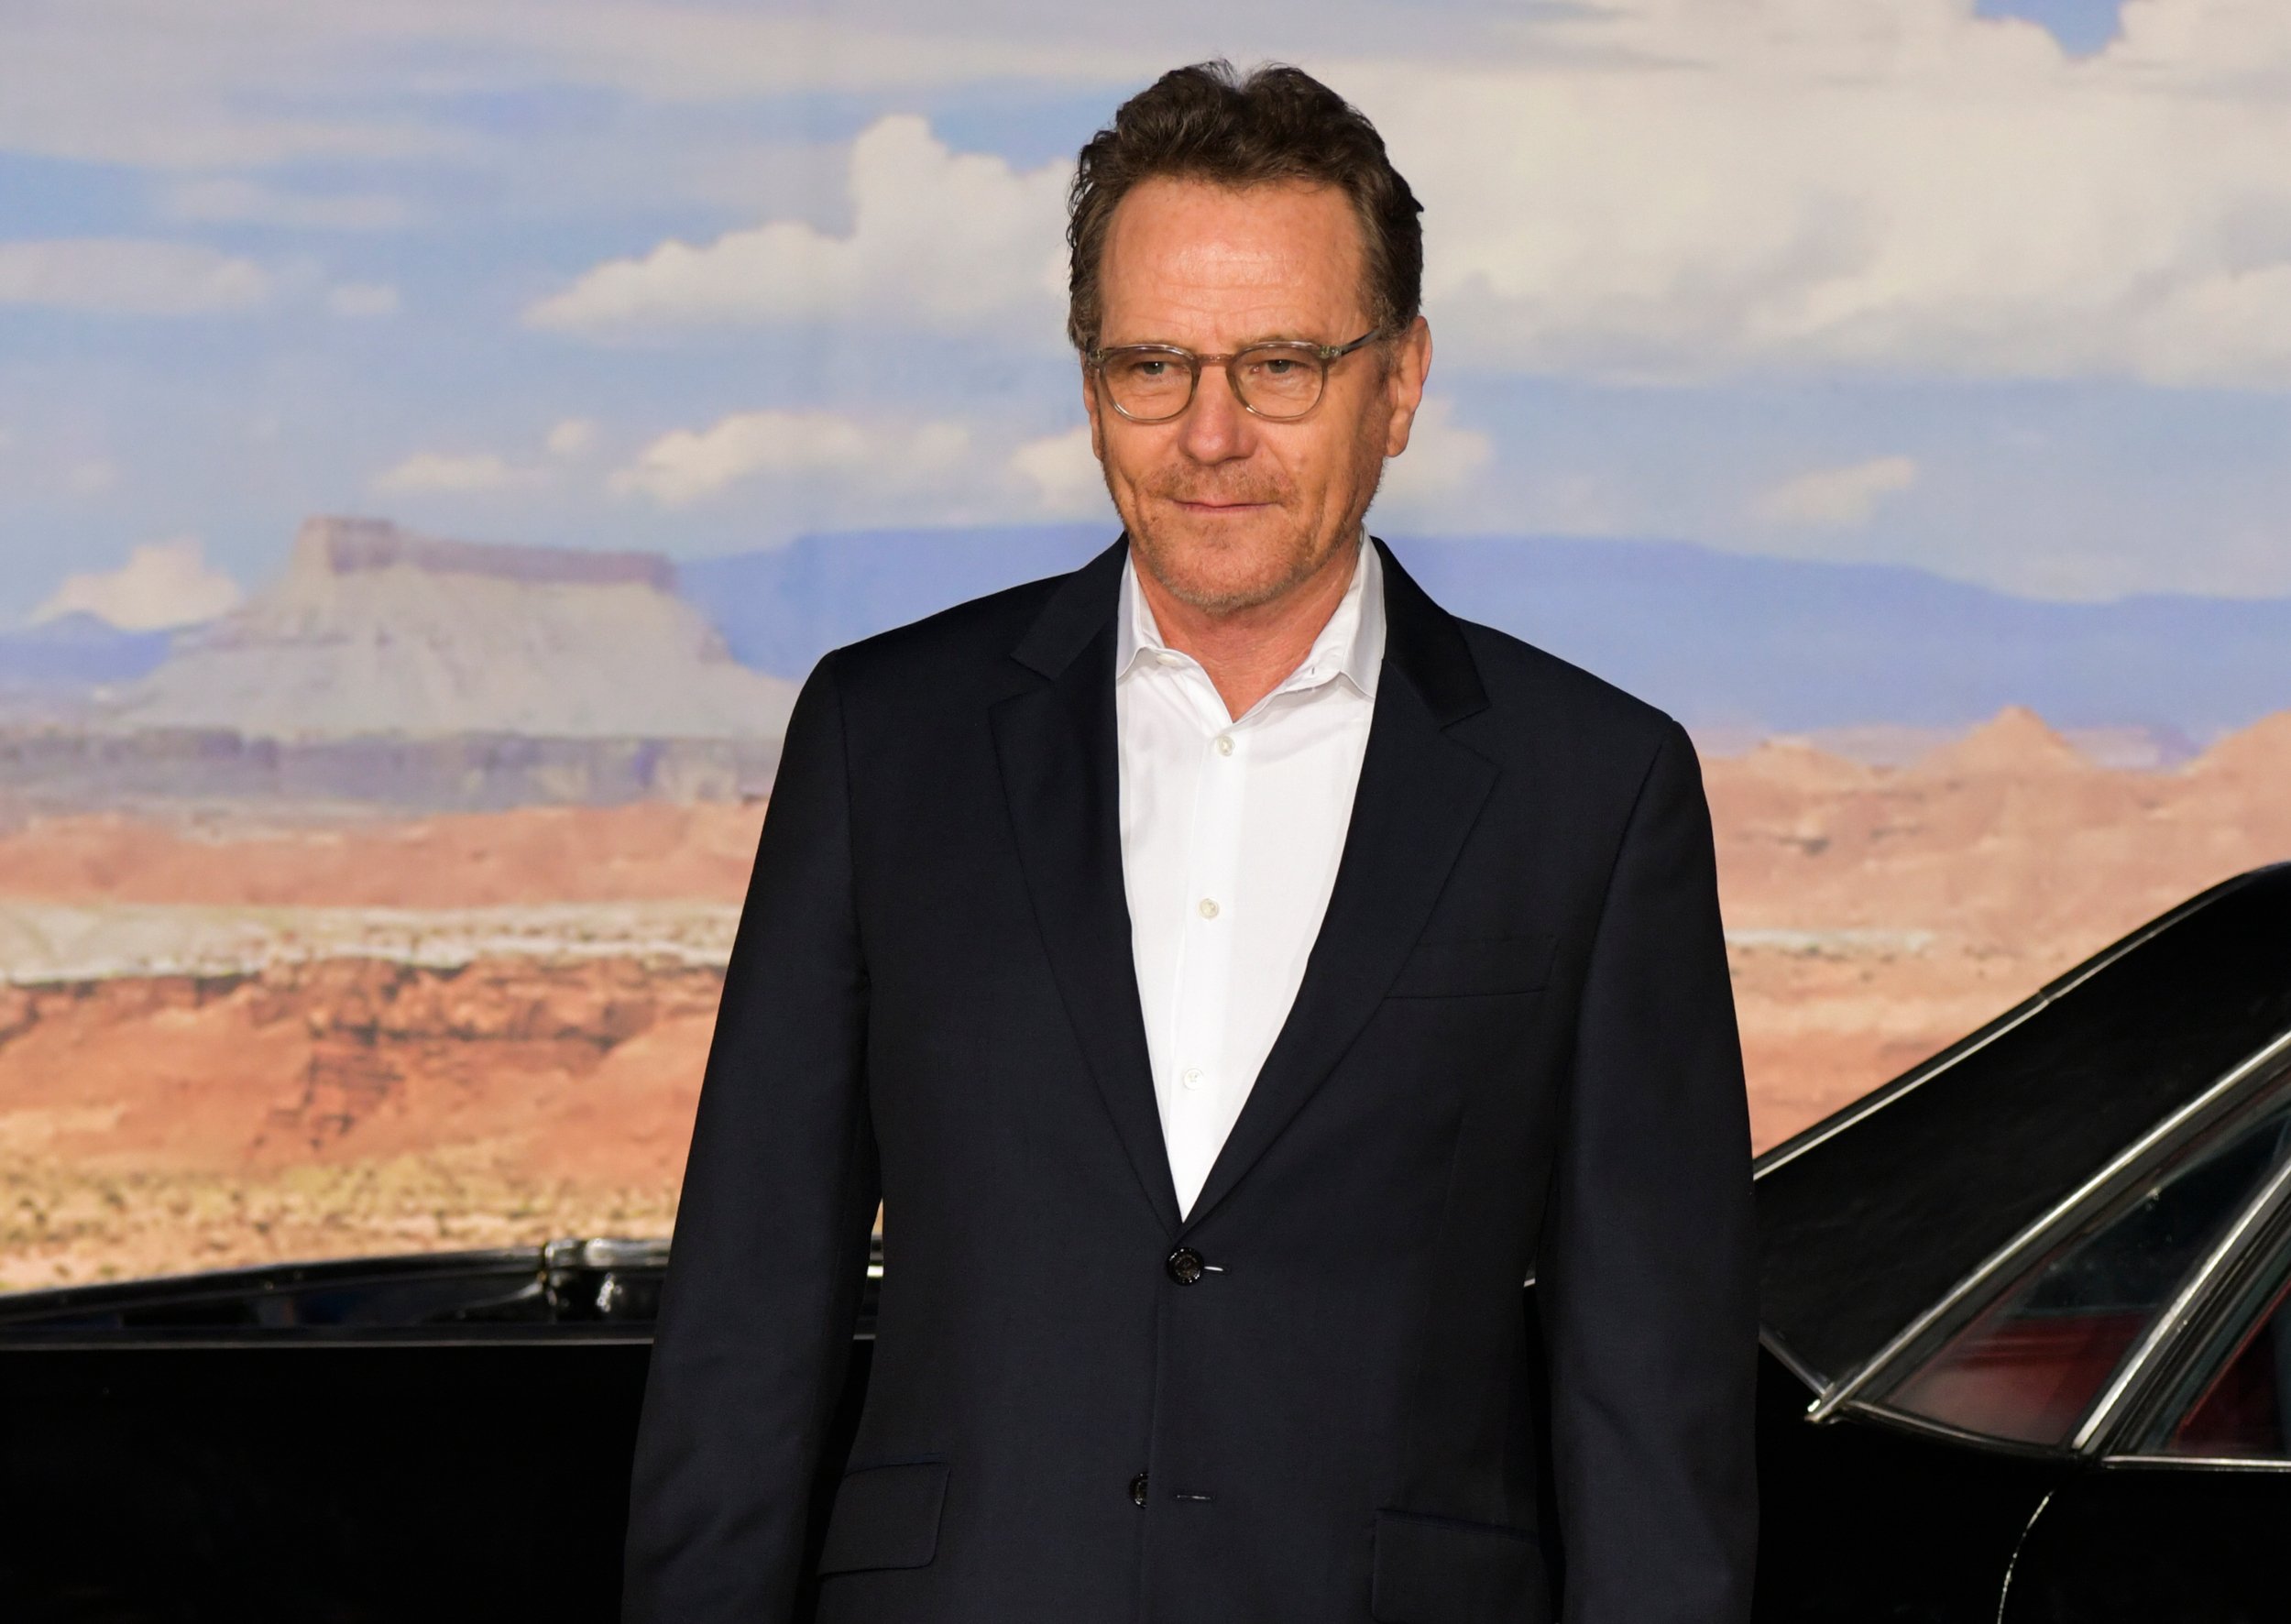 Bryan Cranston stands in front of desert backdrop at 'El Camino' premiere